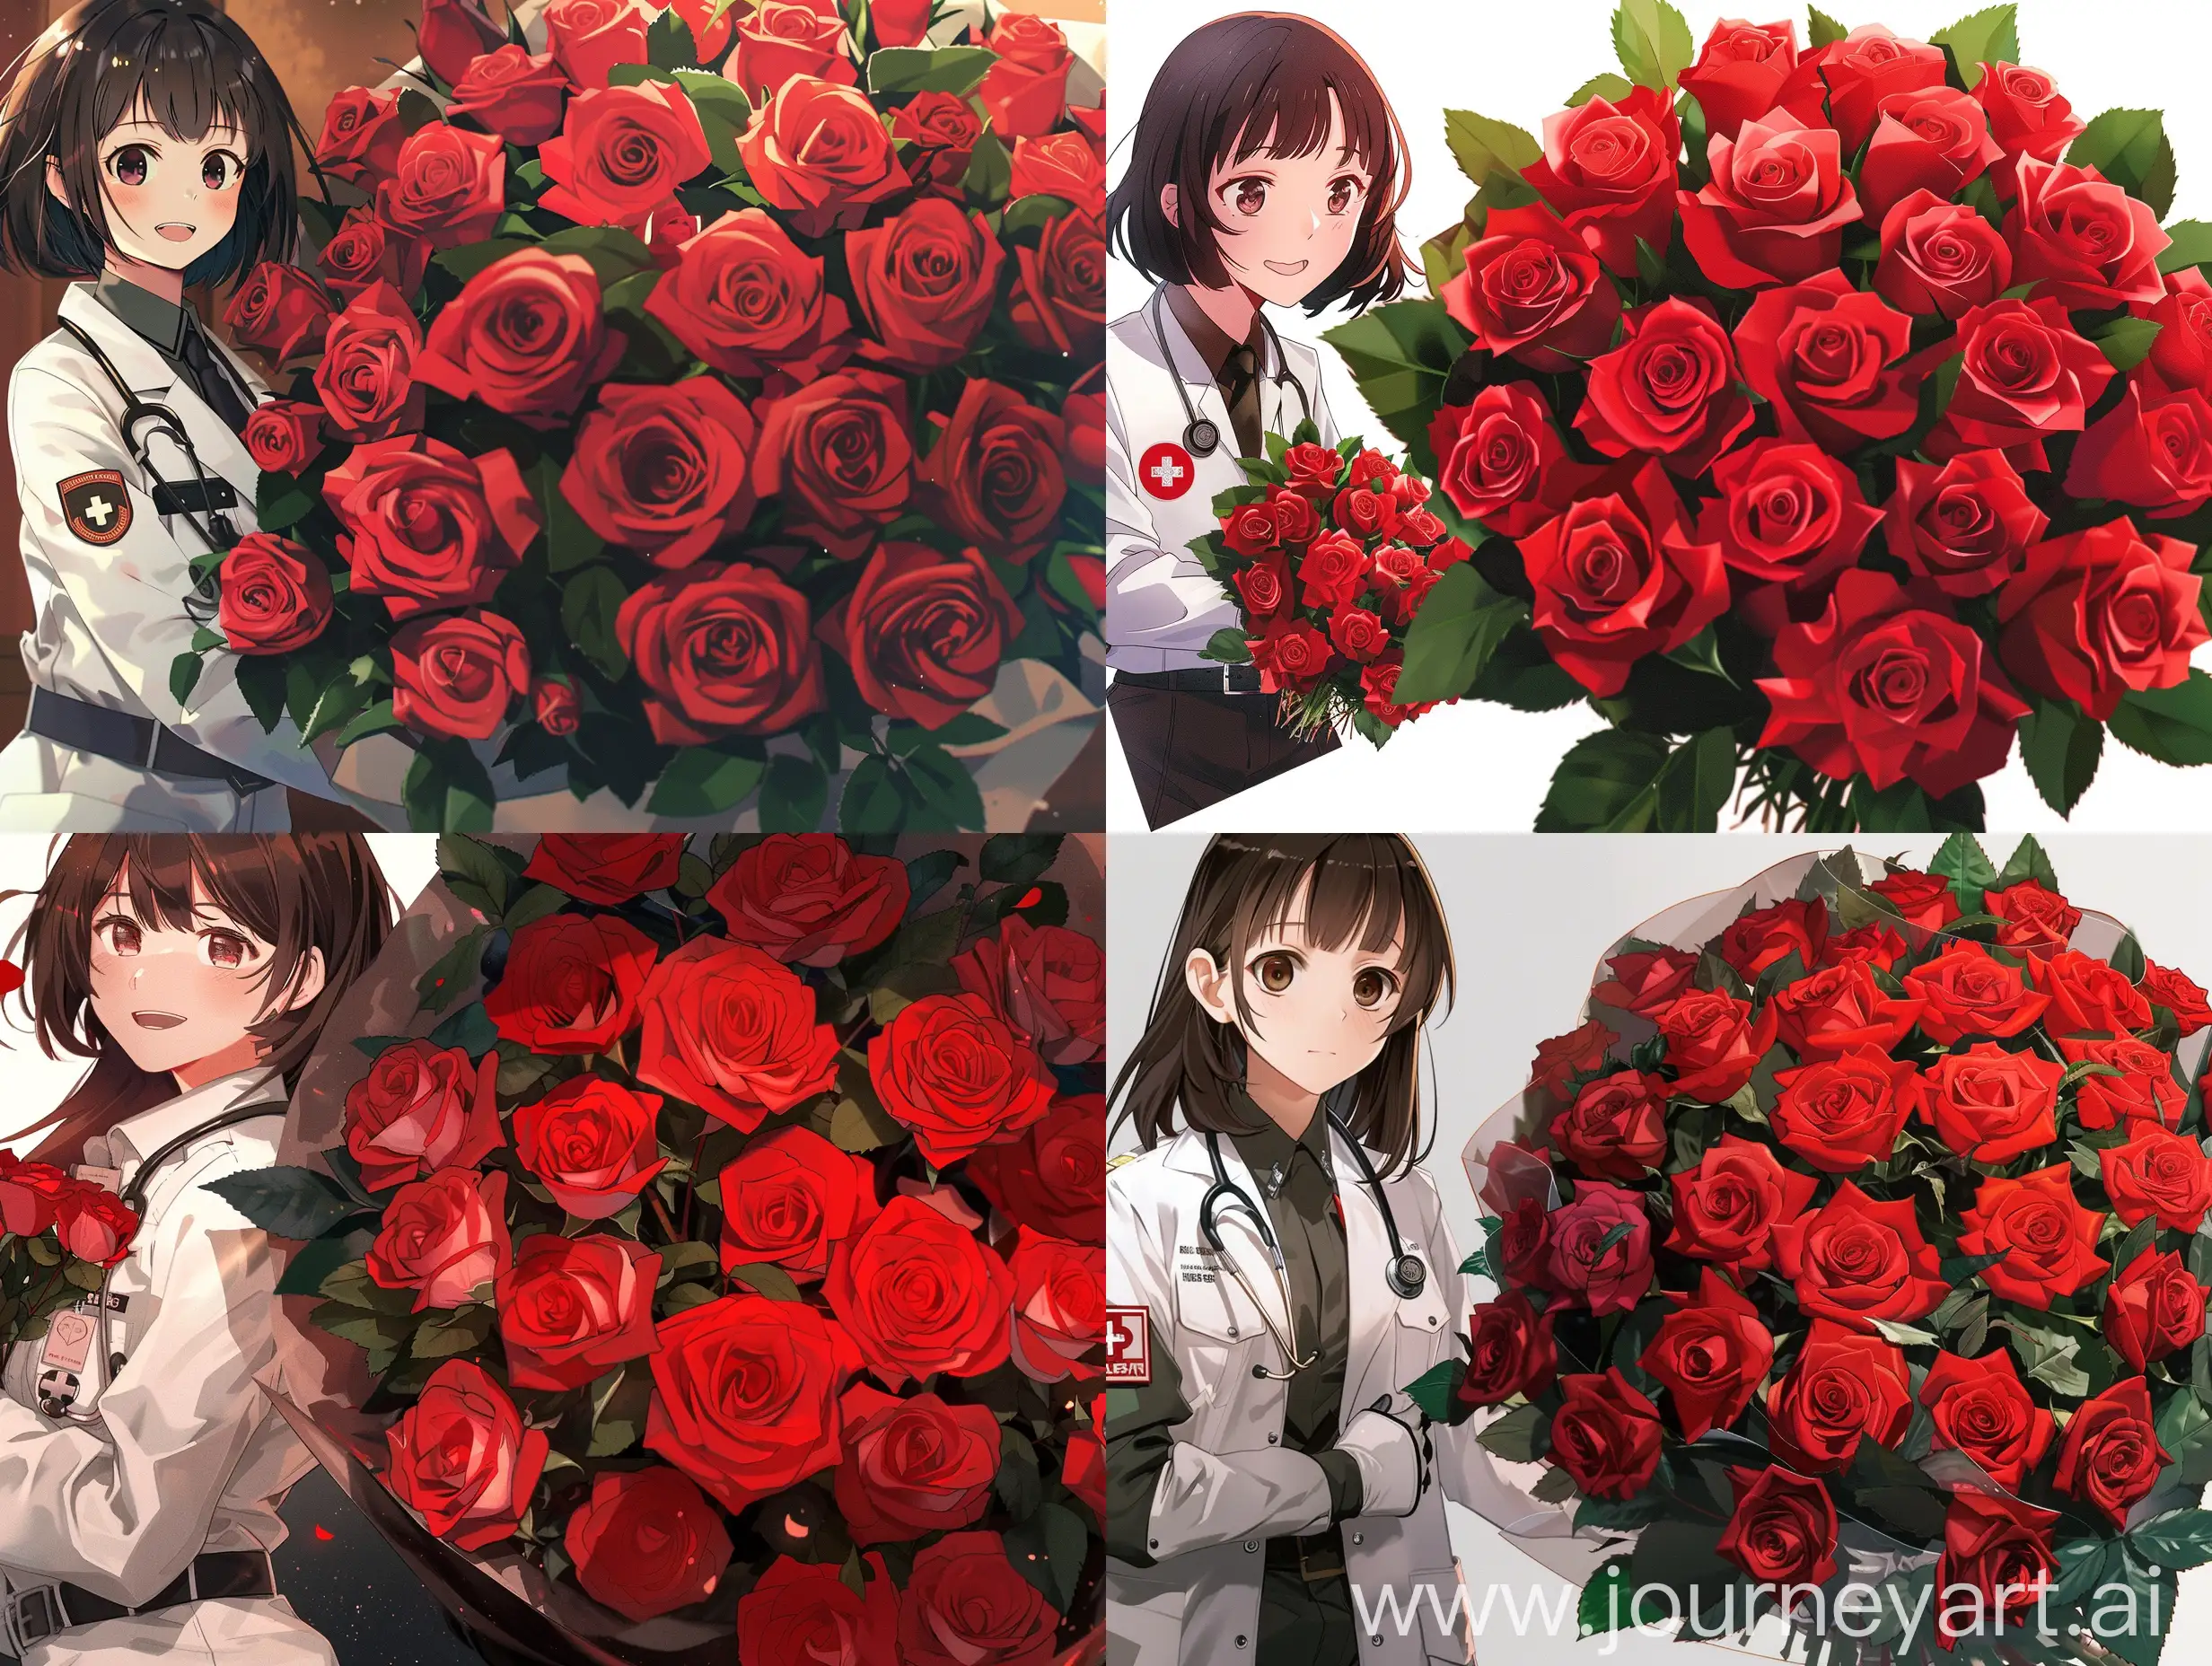 The image for the banner. The picture shows a girl with dark brown hair. She's a medic. Over her uniform is a white medical coat. This girl is in the left corner of the image. The girl is holding a large bouquet of red roses in her hands.